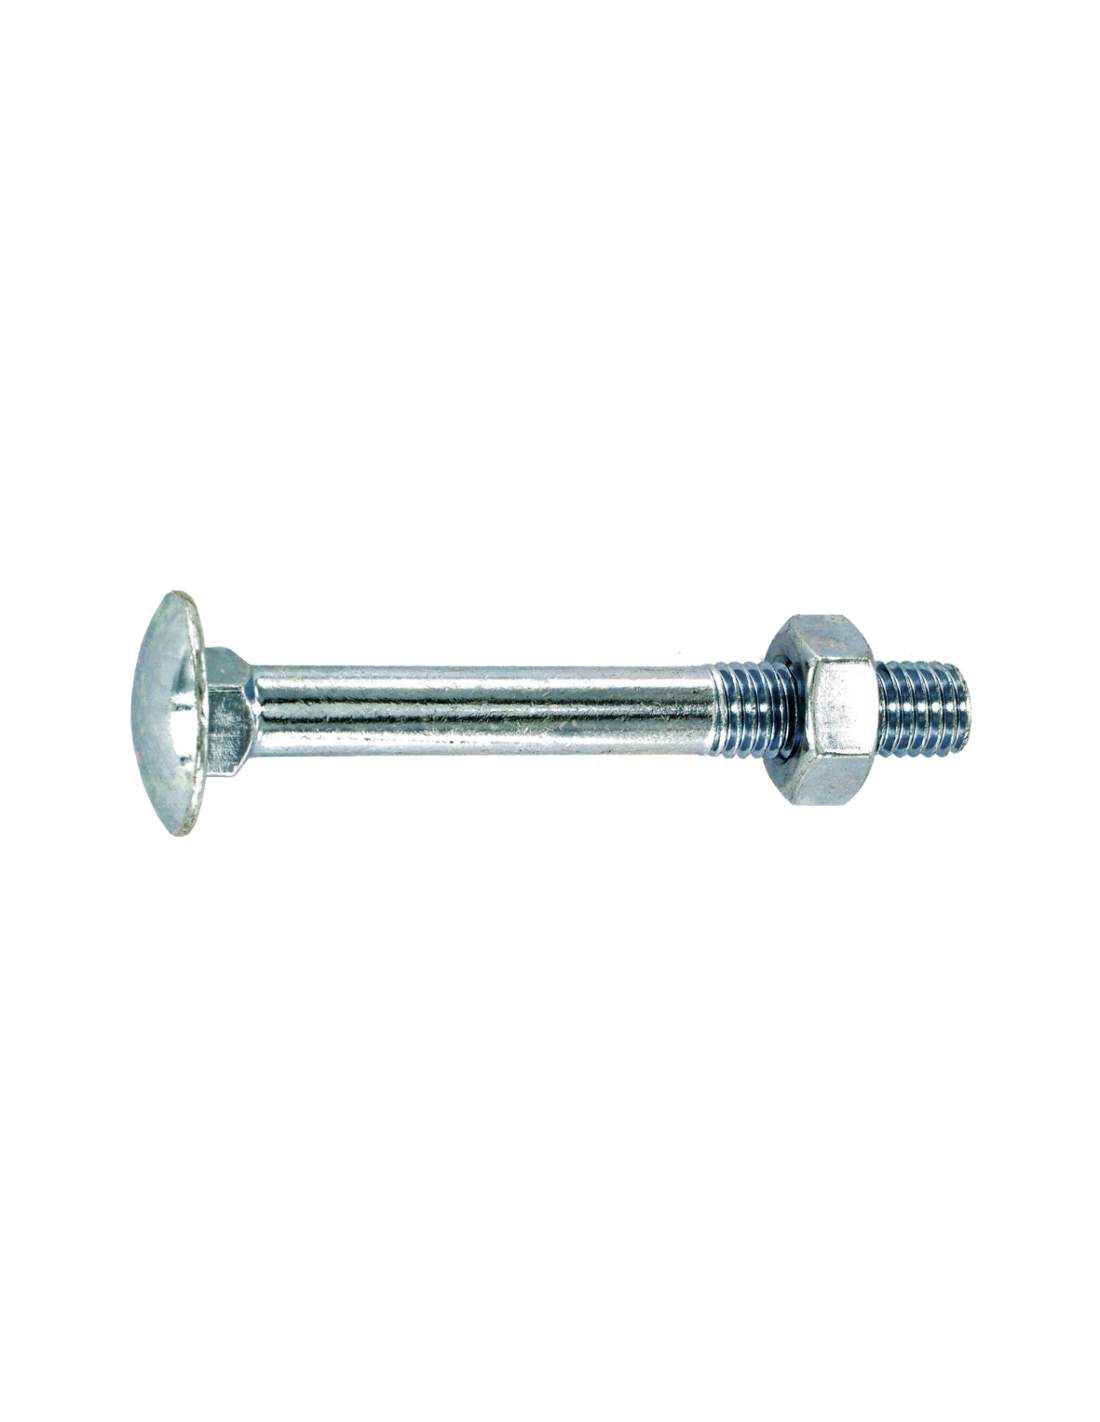 Round head bolt with square collar in galvanized steel 6x30mm, 5 pcs.